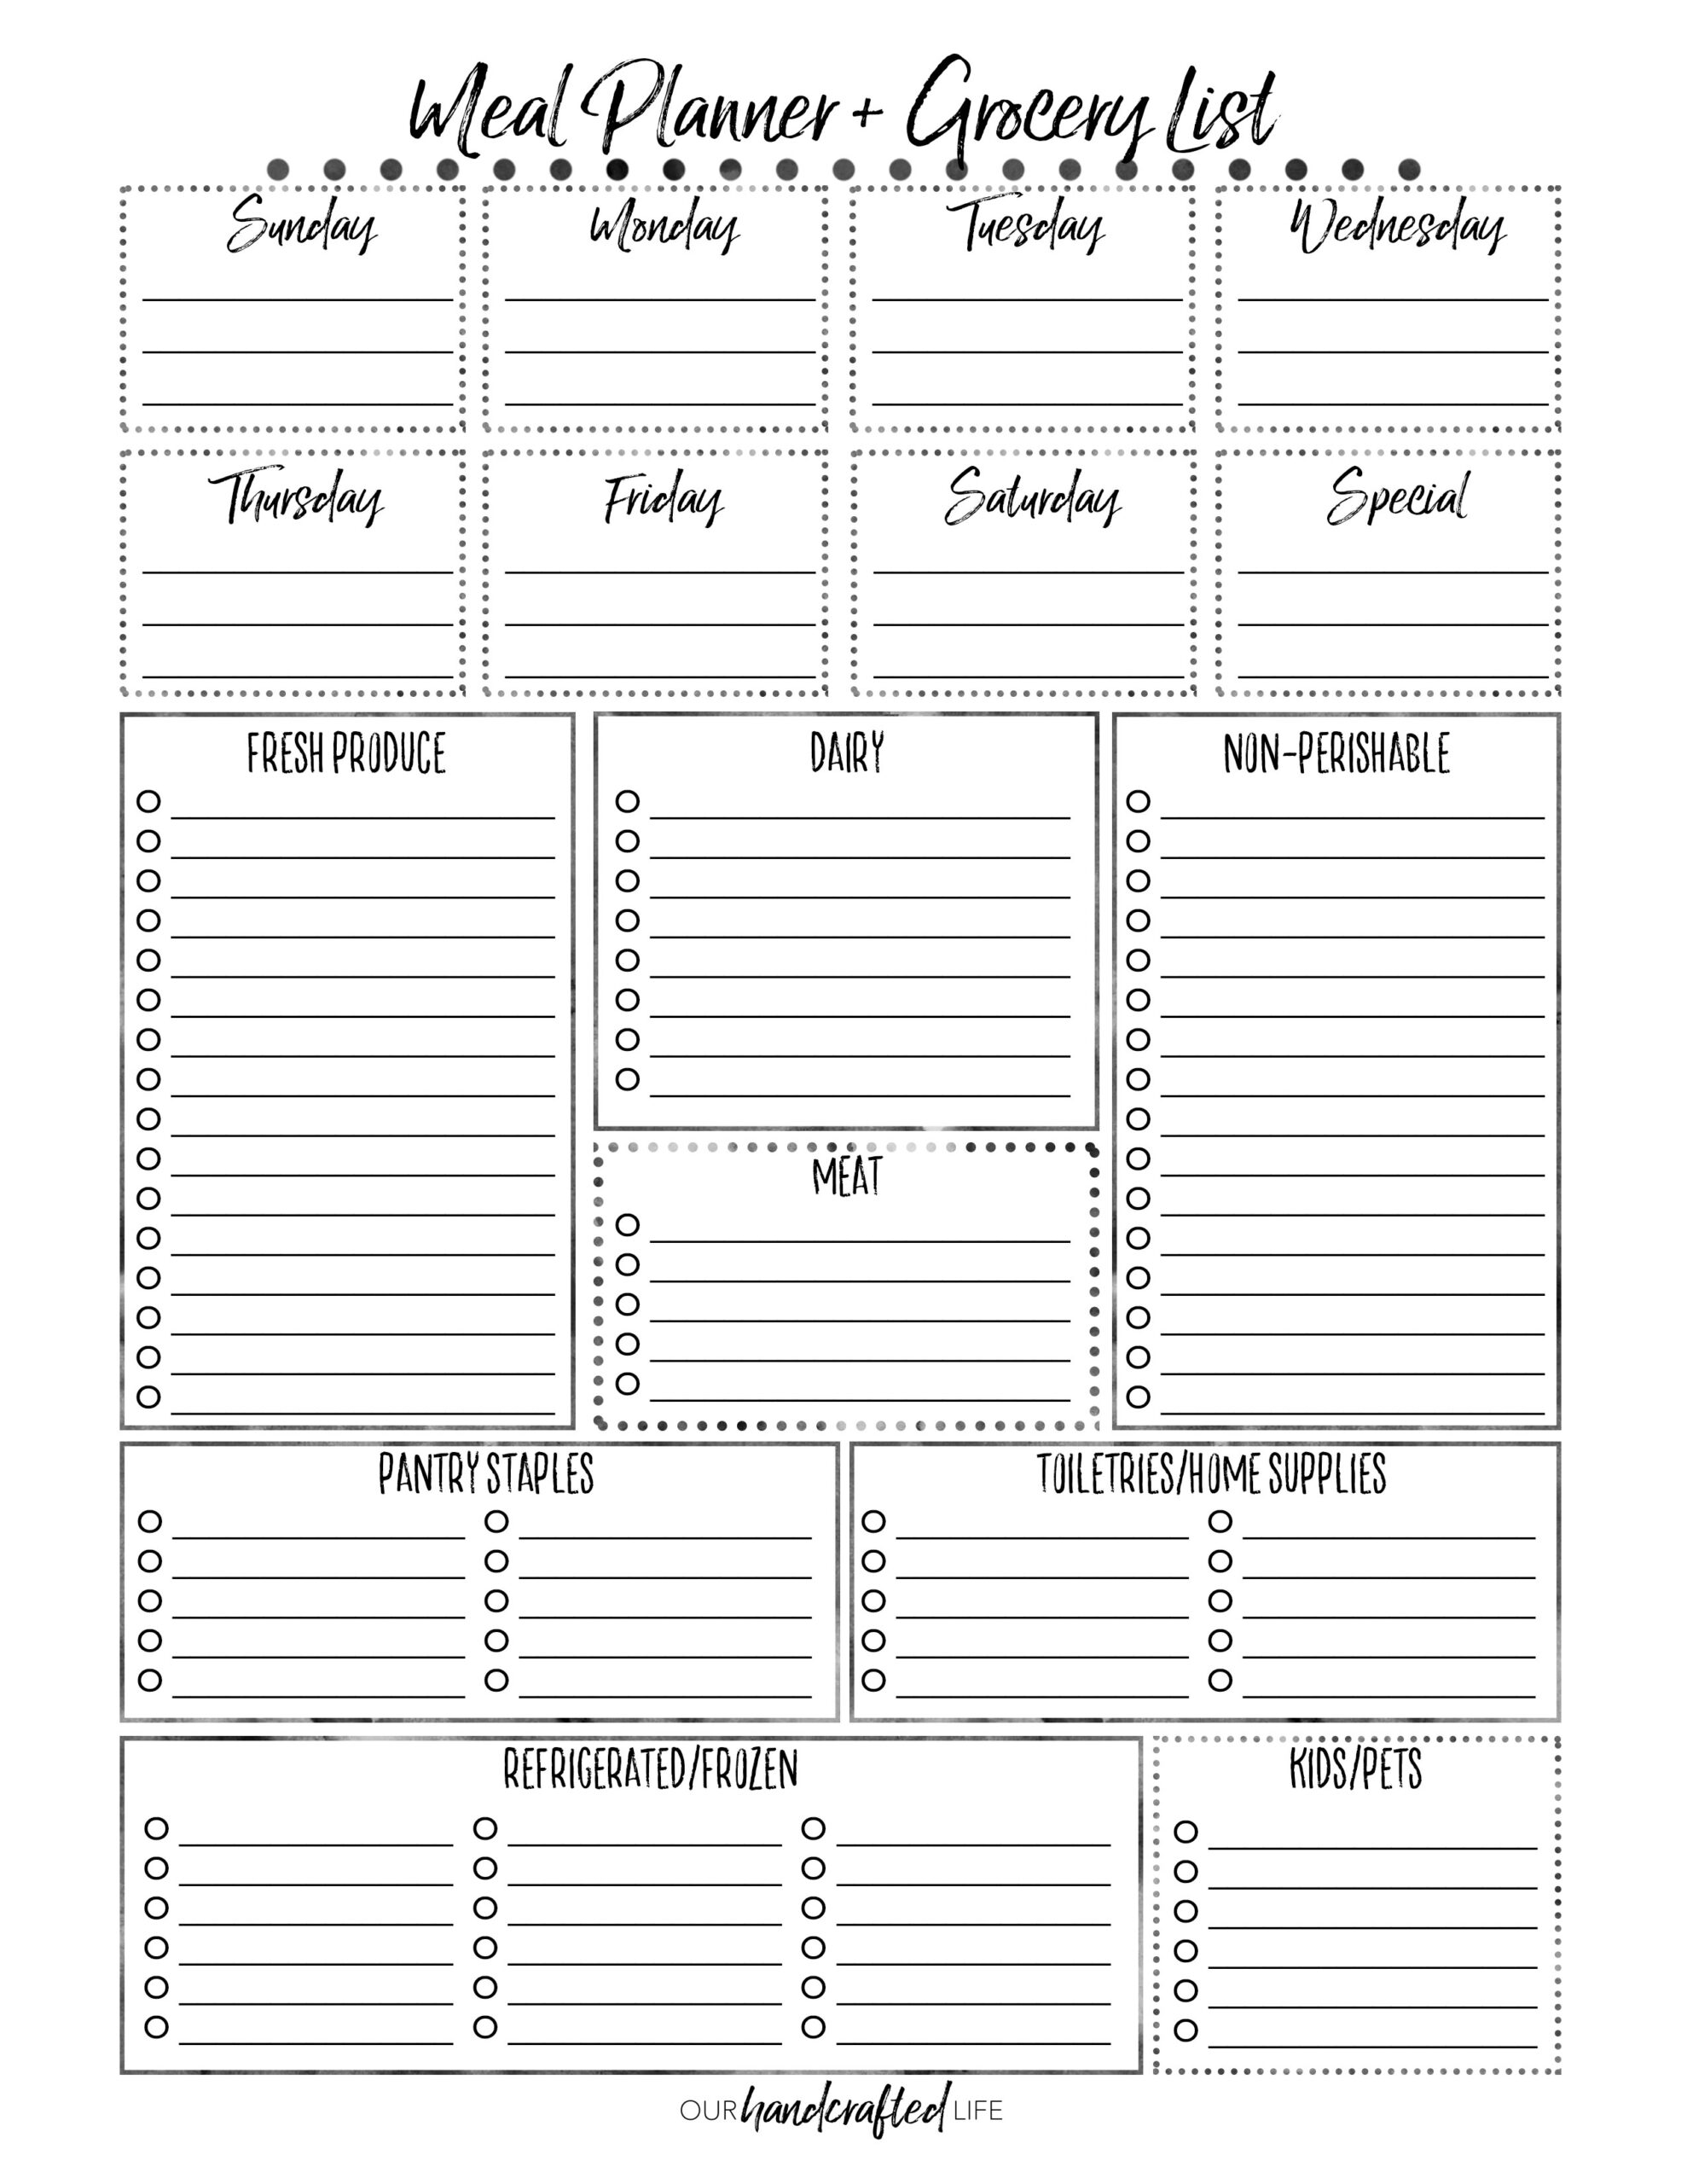 The Most Practical Meal Planner Ever - Our Handcrafted Life with regard to Free Printable Grocery List and Meal Planner